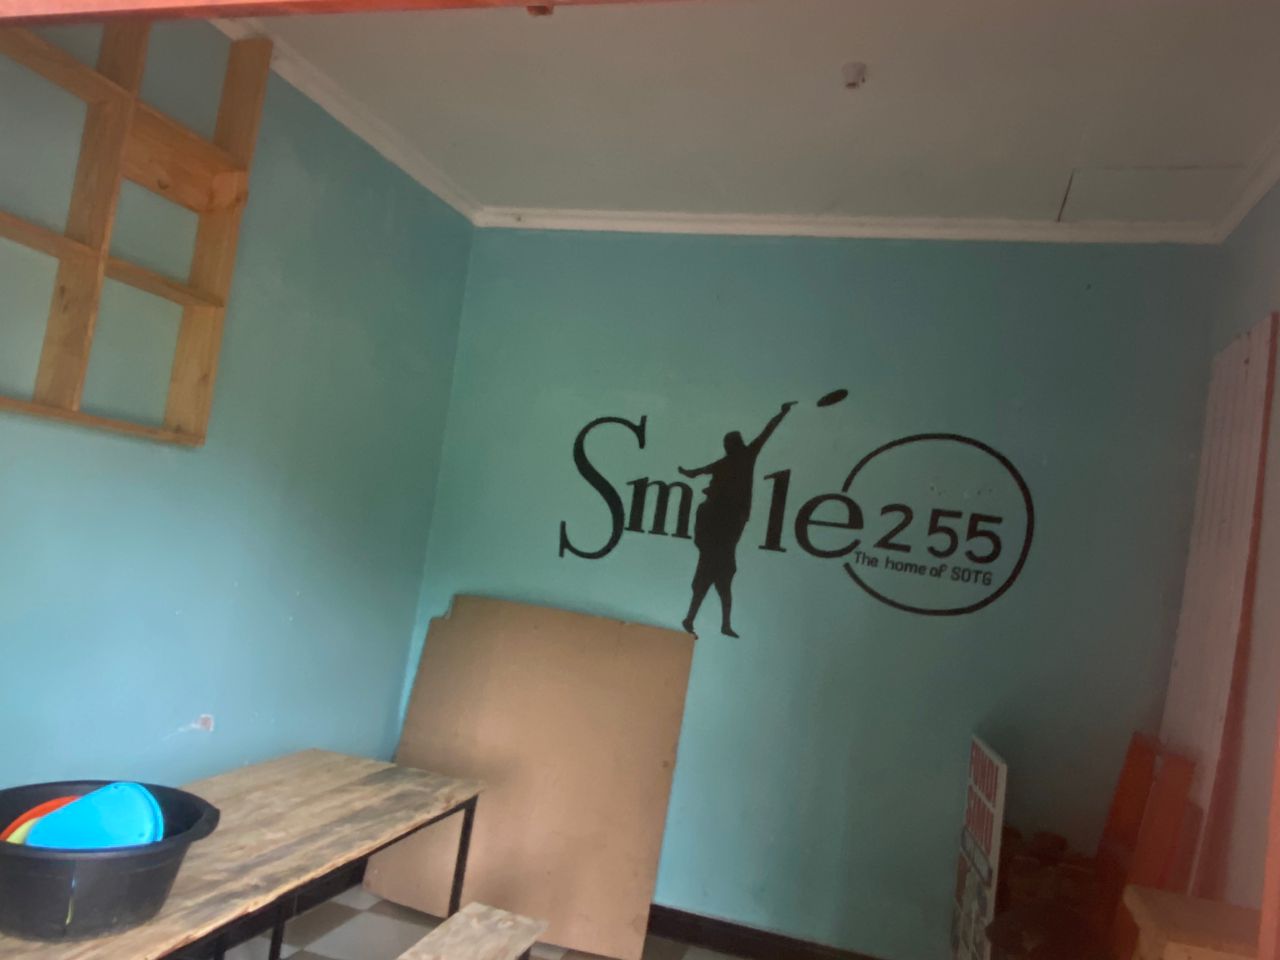 Smile255 office and meeting place